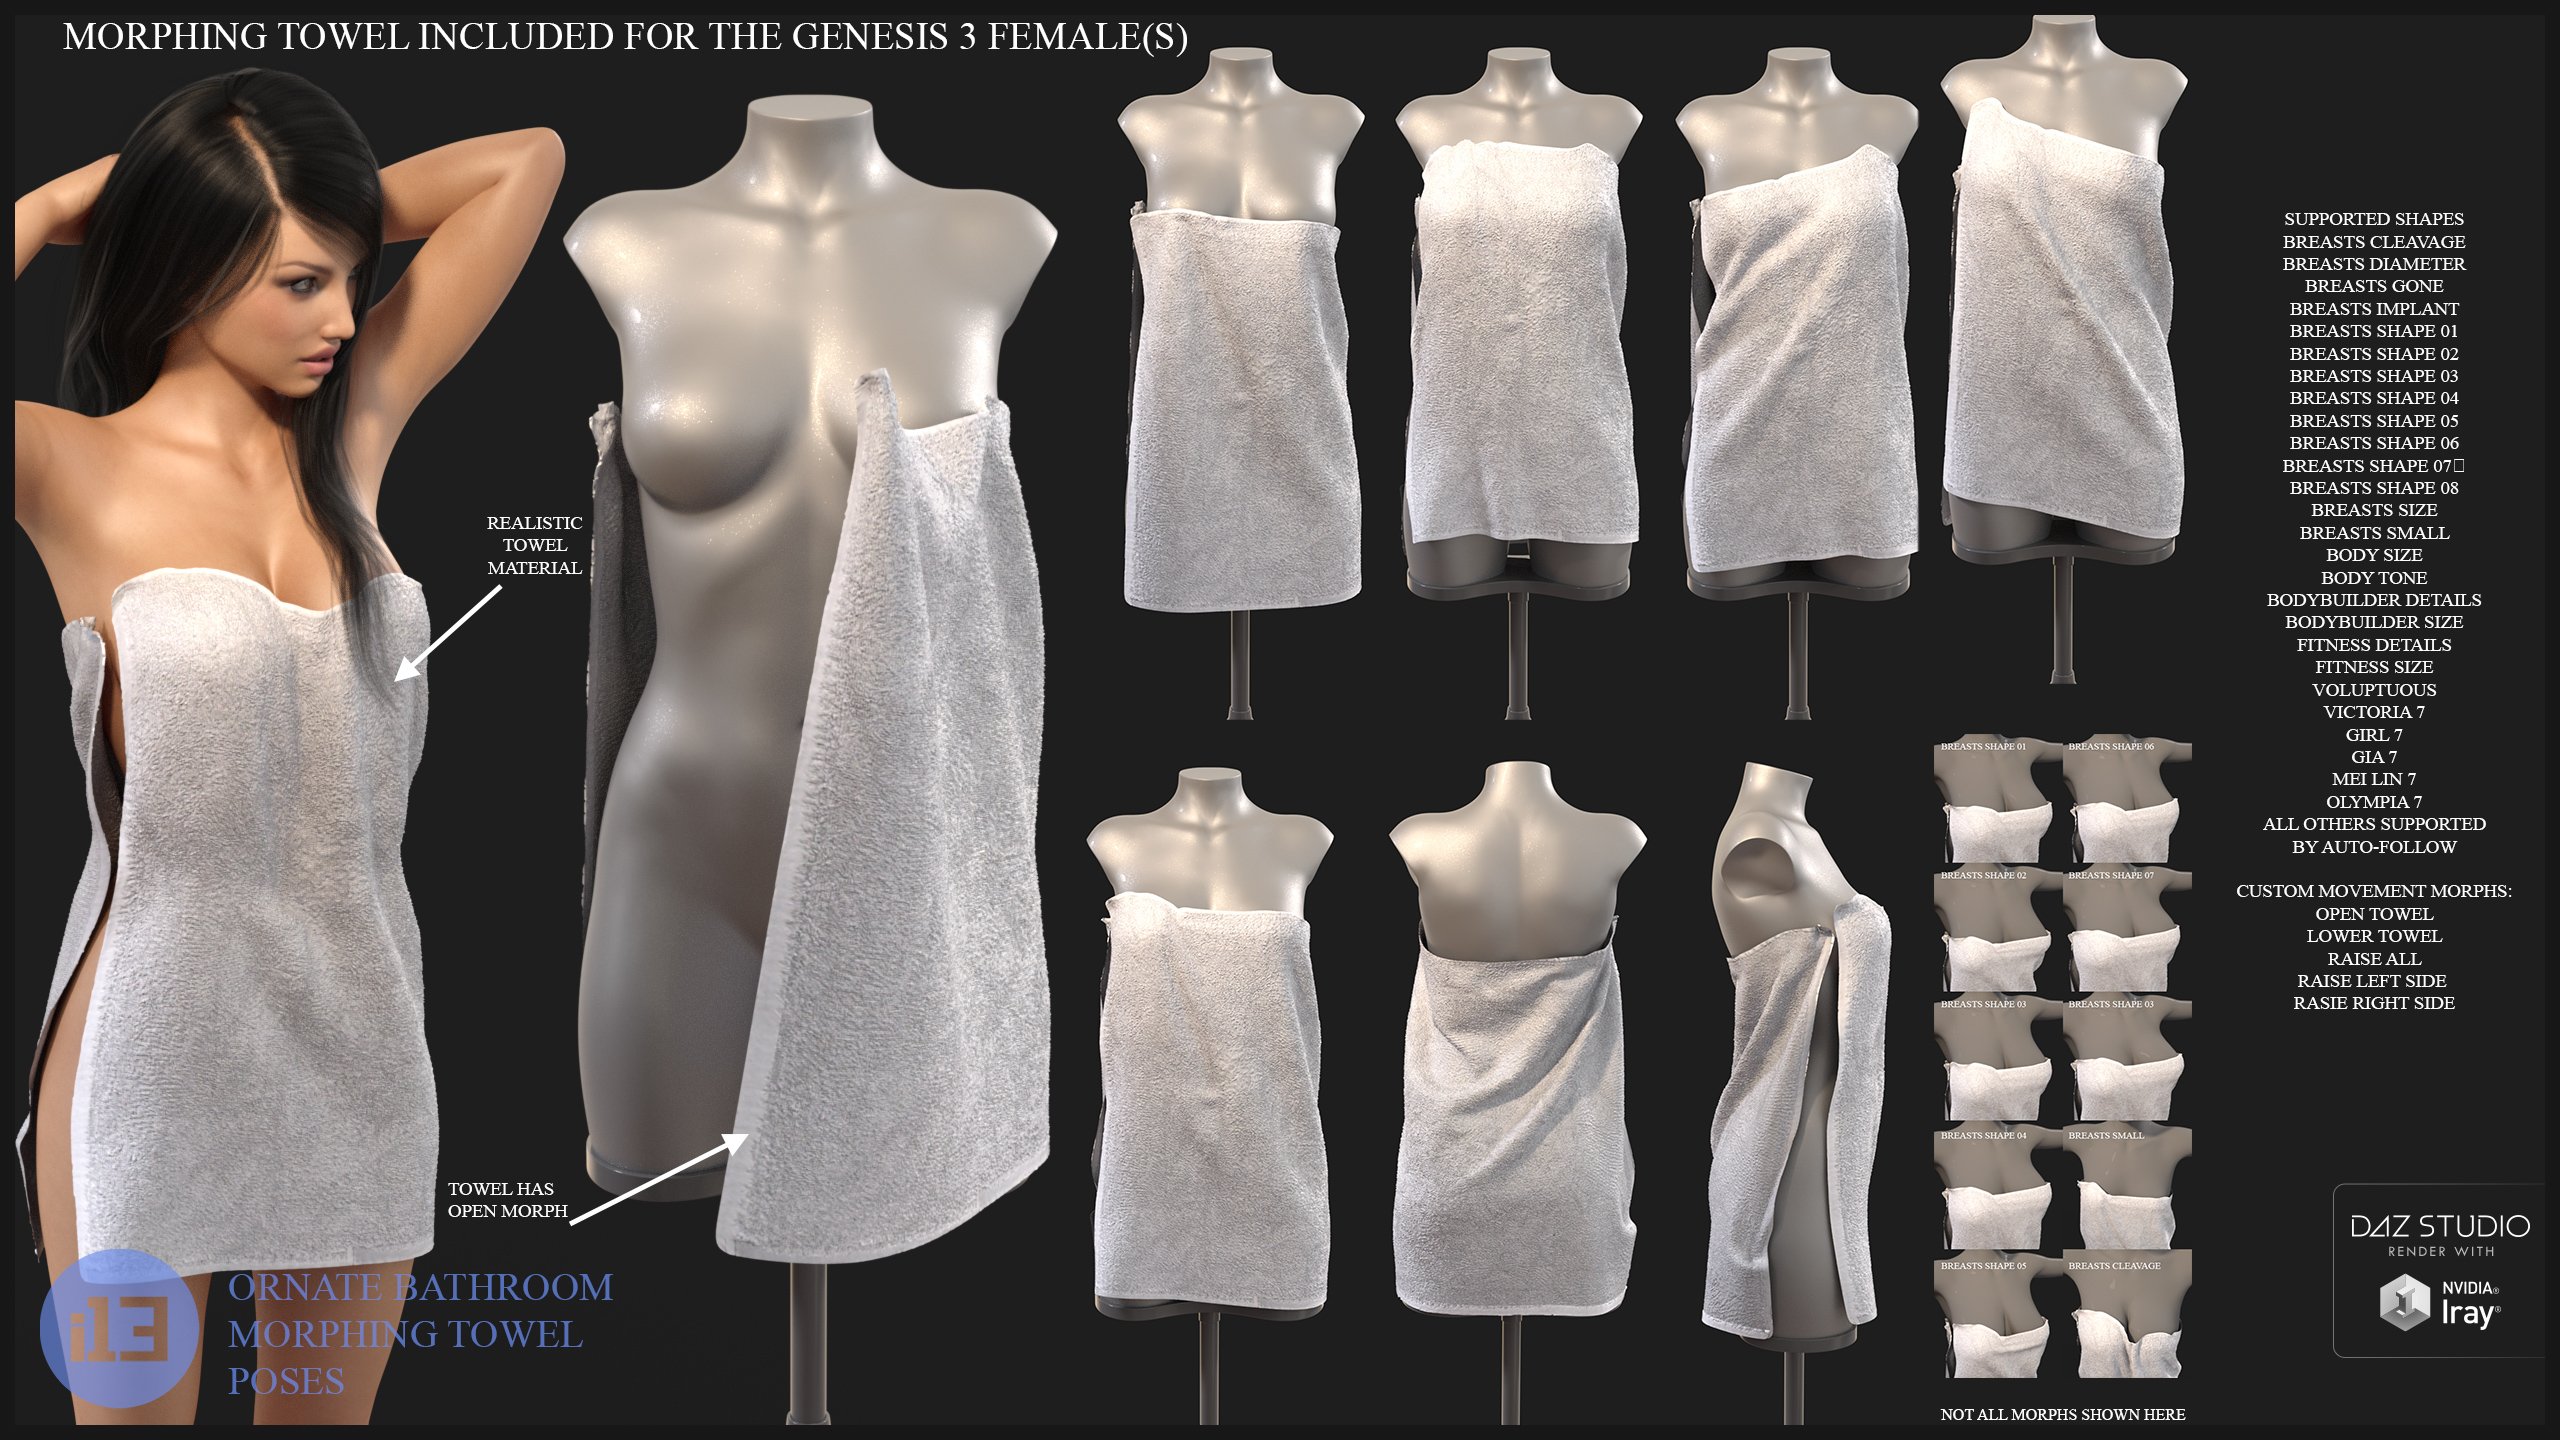 i13 Ornate Bathroom with Morphing Towel and Poses by: ironman13, 3D Models by Daz 3D